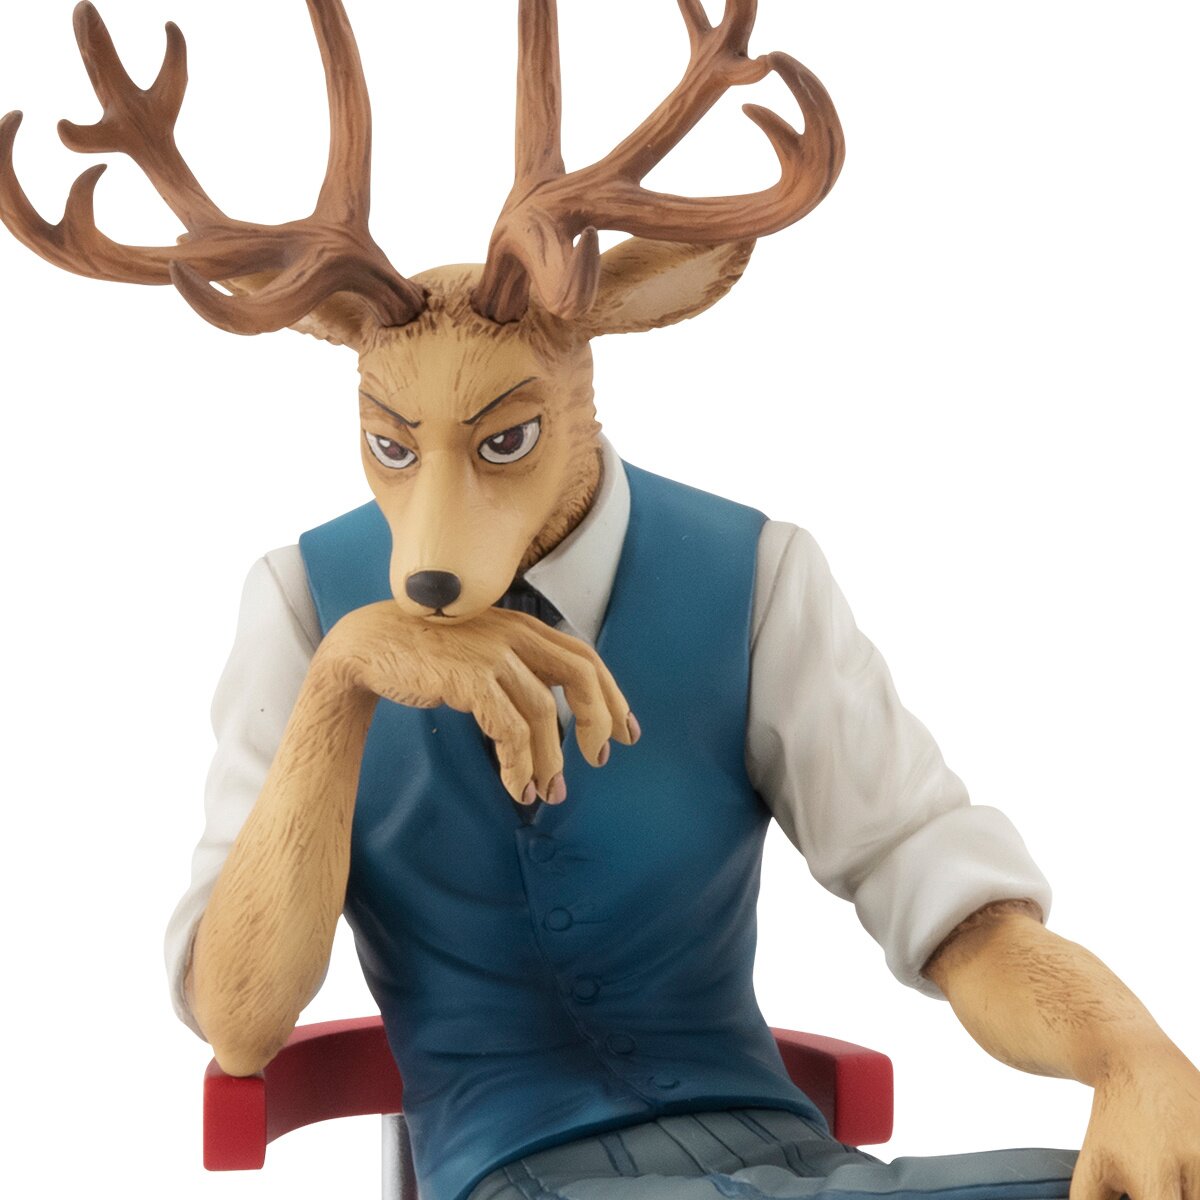 MegaHouse BEASTARS Louis Action Figure Anime Model Desktop Decorations  Collectible Toys Gifts